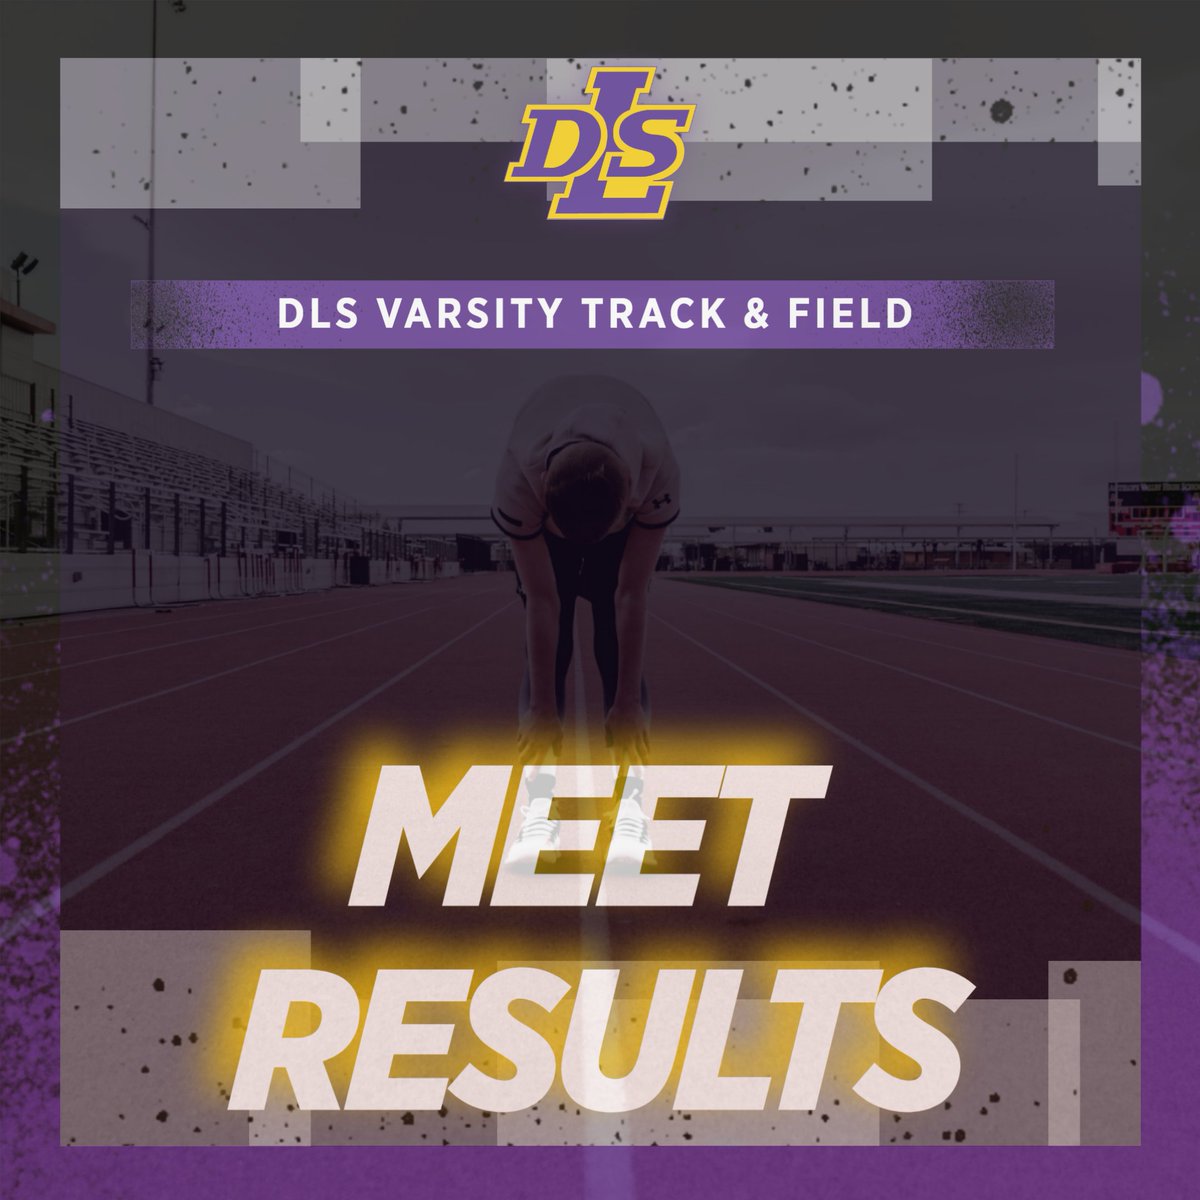 DLS Varsity Track & Field fell short against Detroit CC 88-40. 
For complete results: athletic.net/TrackAndField/…
#PilotPride
Next up: Friday 4/26 @Romeo Barnyard Invite (Distance); Saturday 4/27 @Oxford Invite (Sprint/Field).